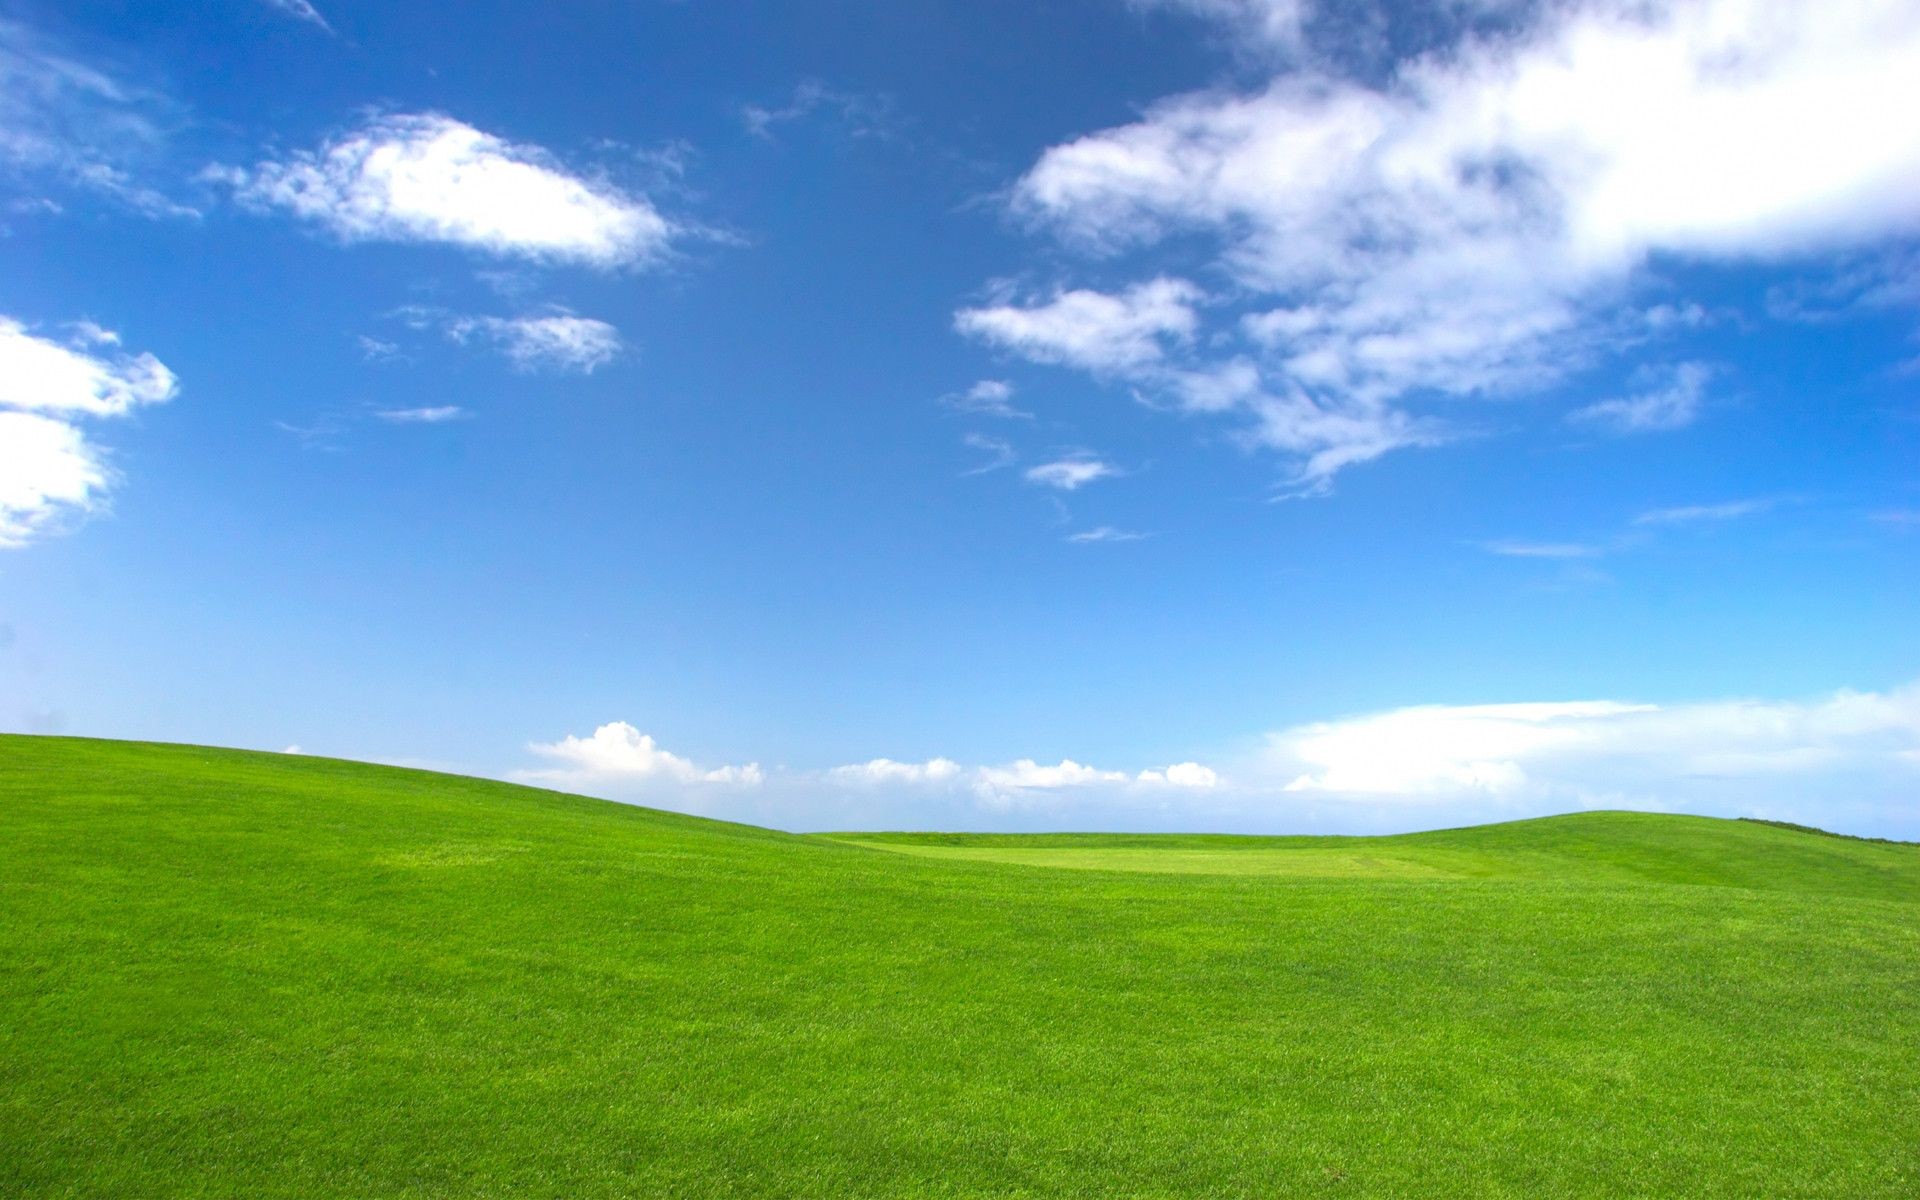 Windows Xp Wallpaper For Android Android Logo Windows 7 HD Wallpapers Wallpaper Cave Due 